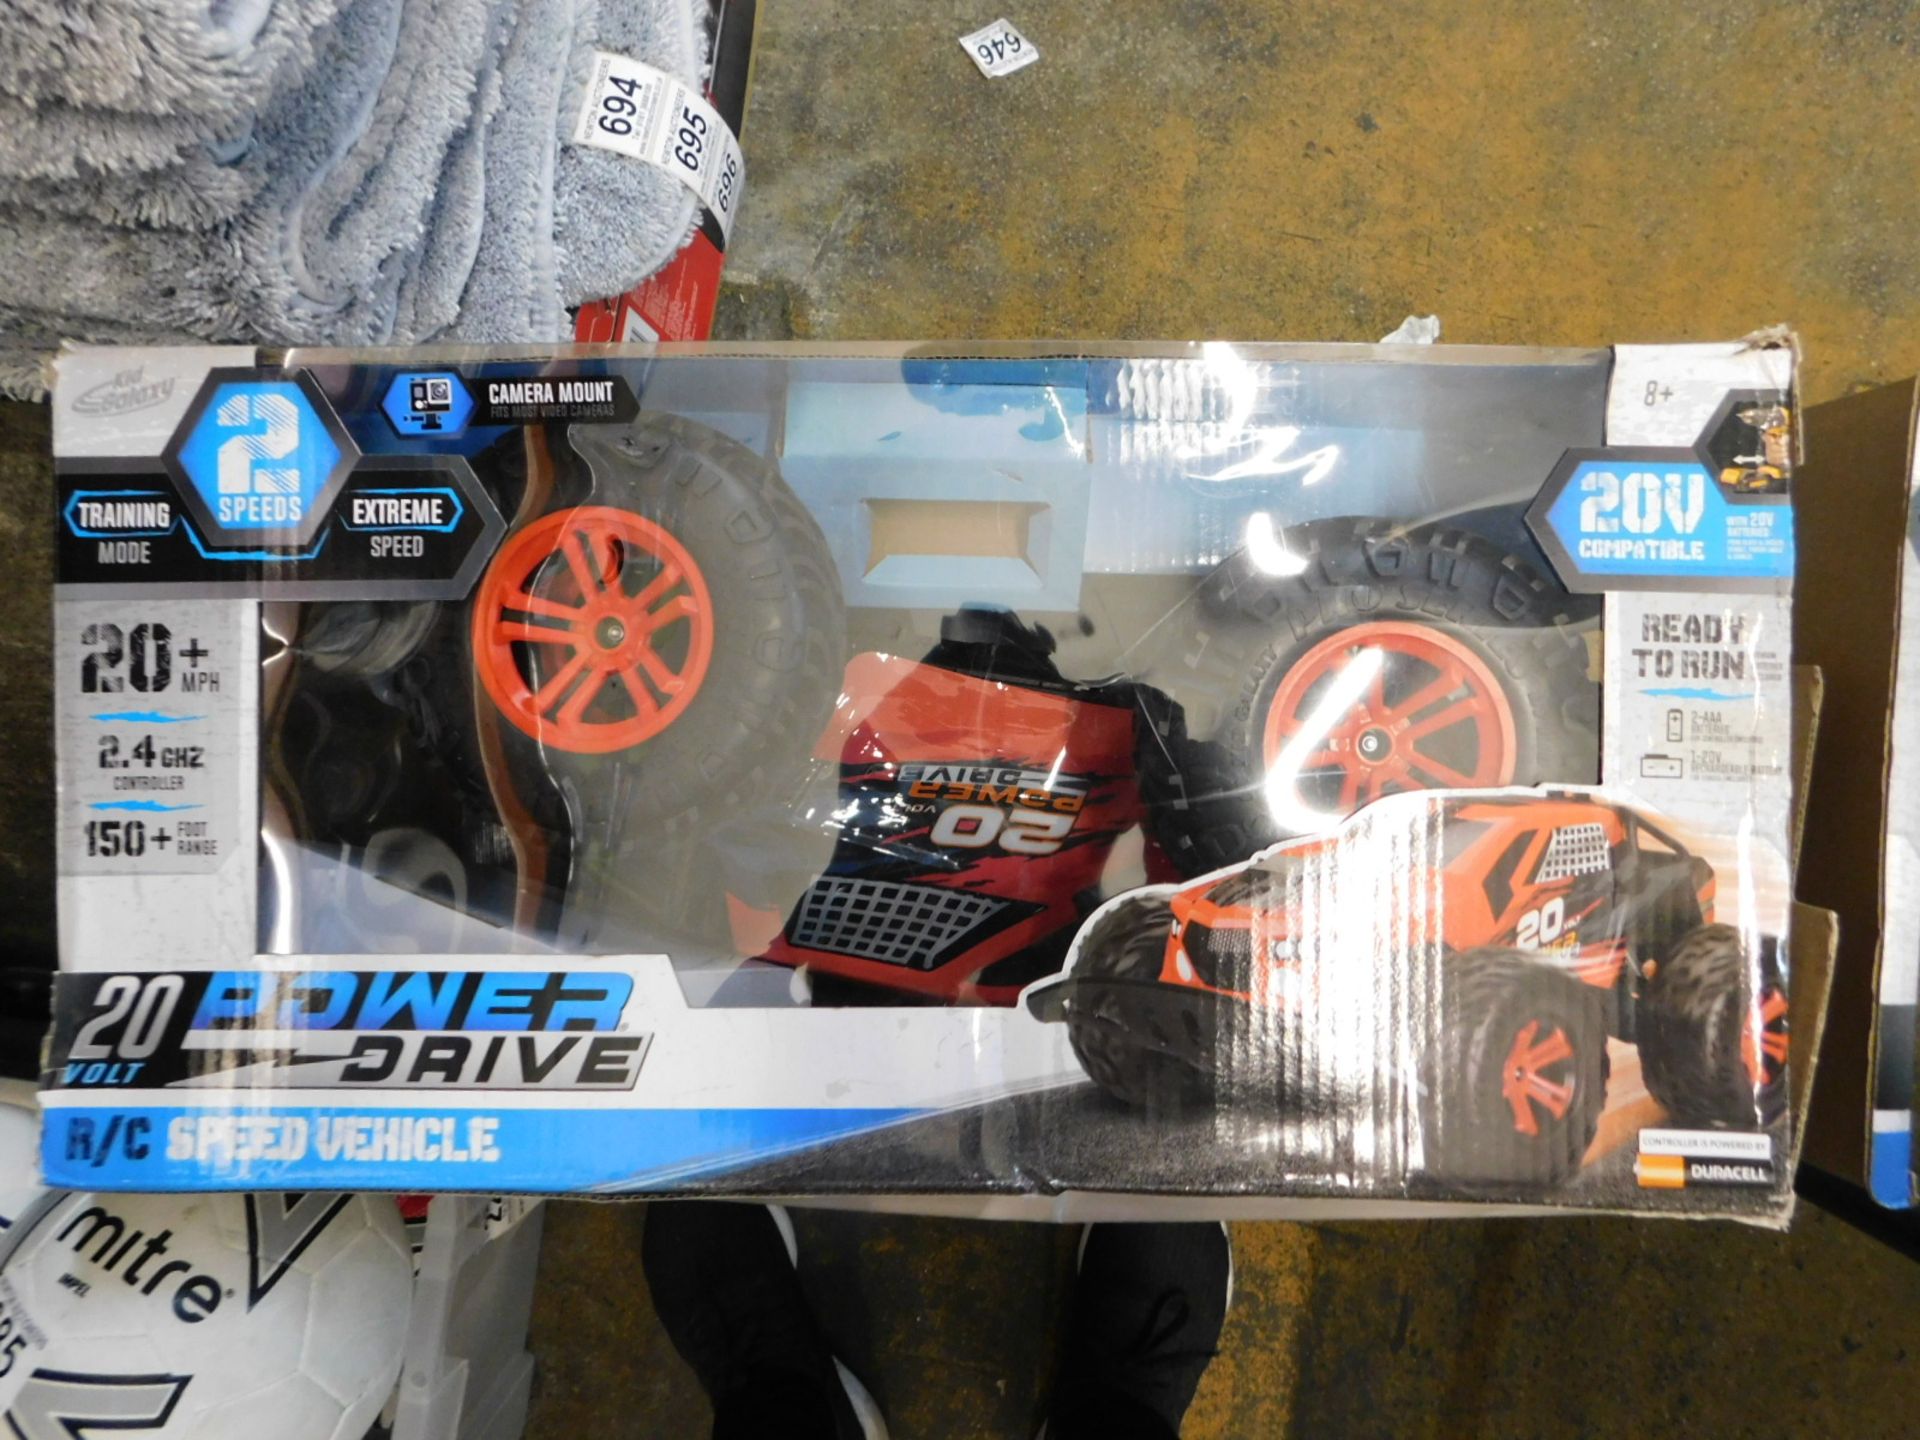 1 BOXED POWER DRIVE REMOTE CONTROL MONSTER TRUCK RRP Â£89.99